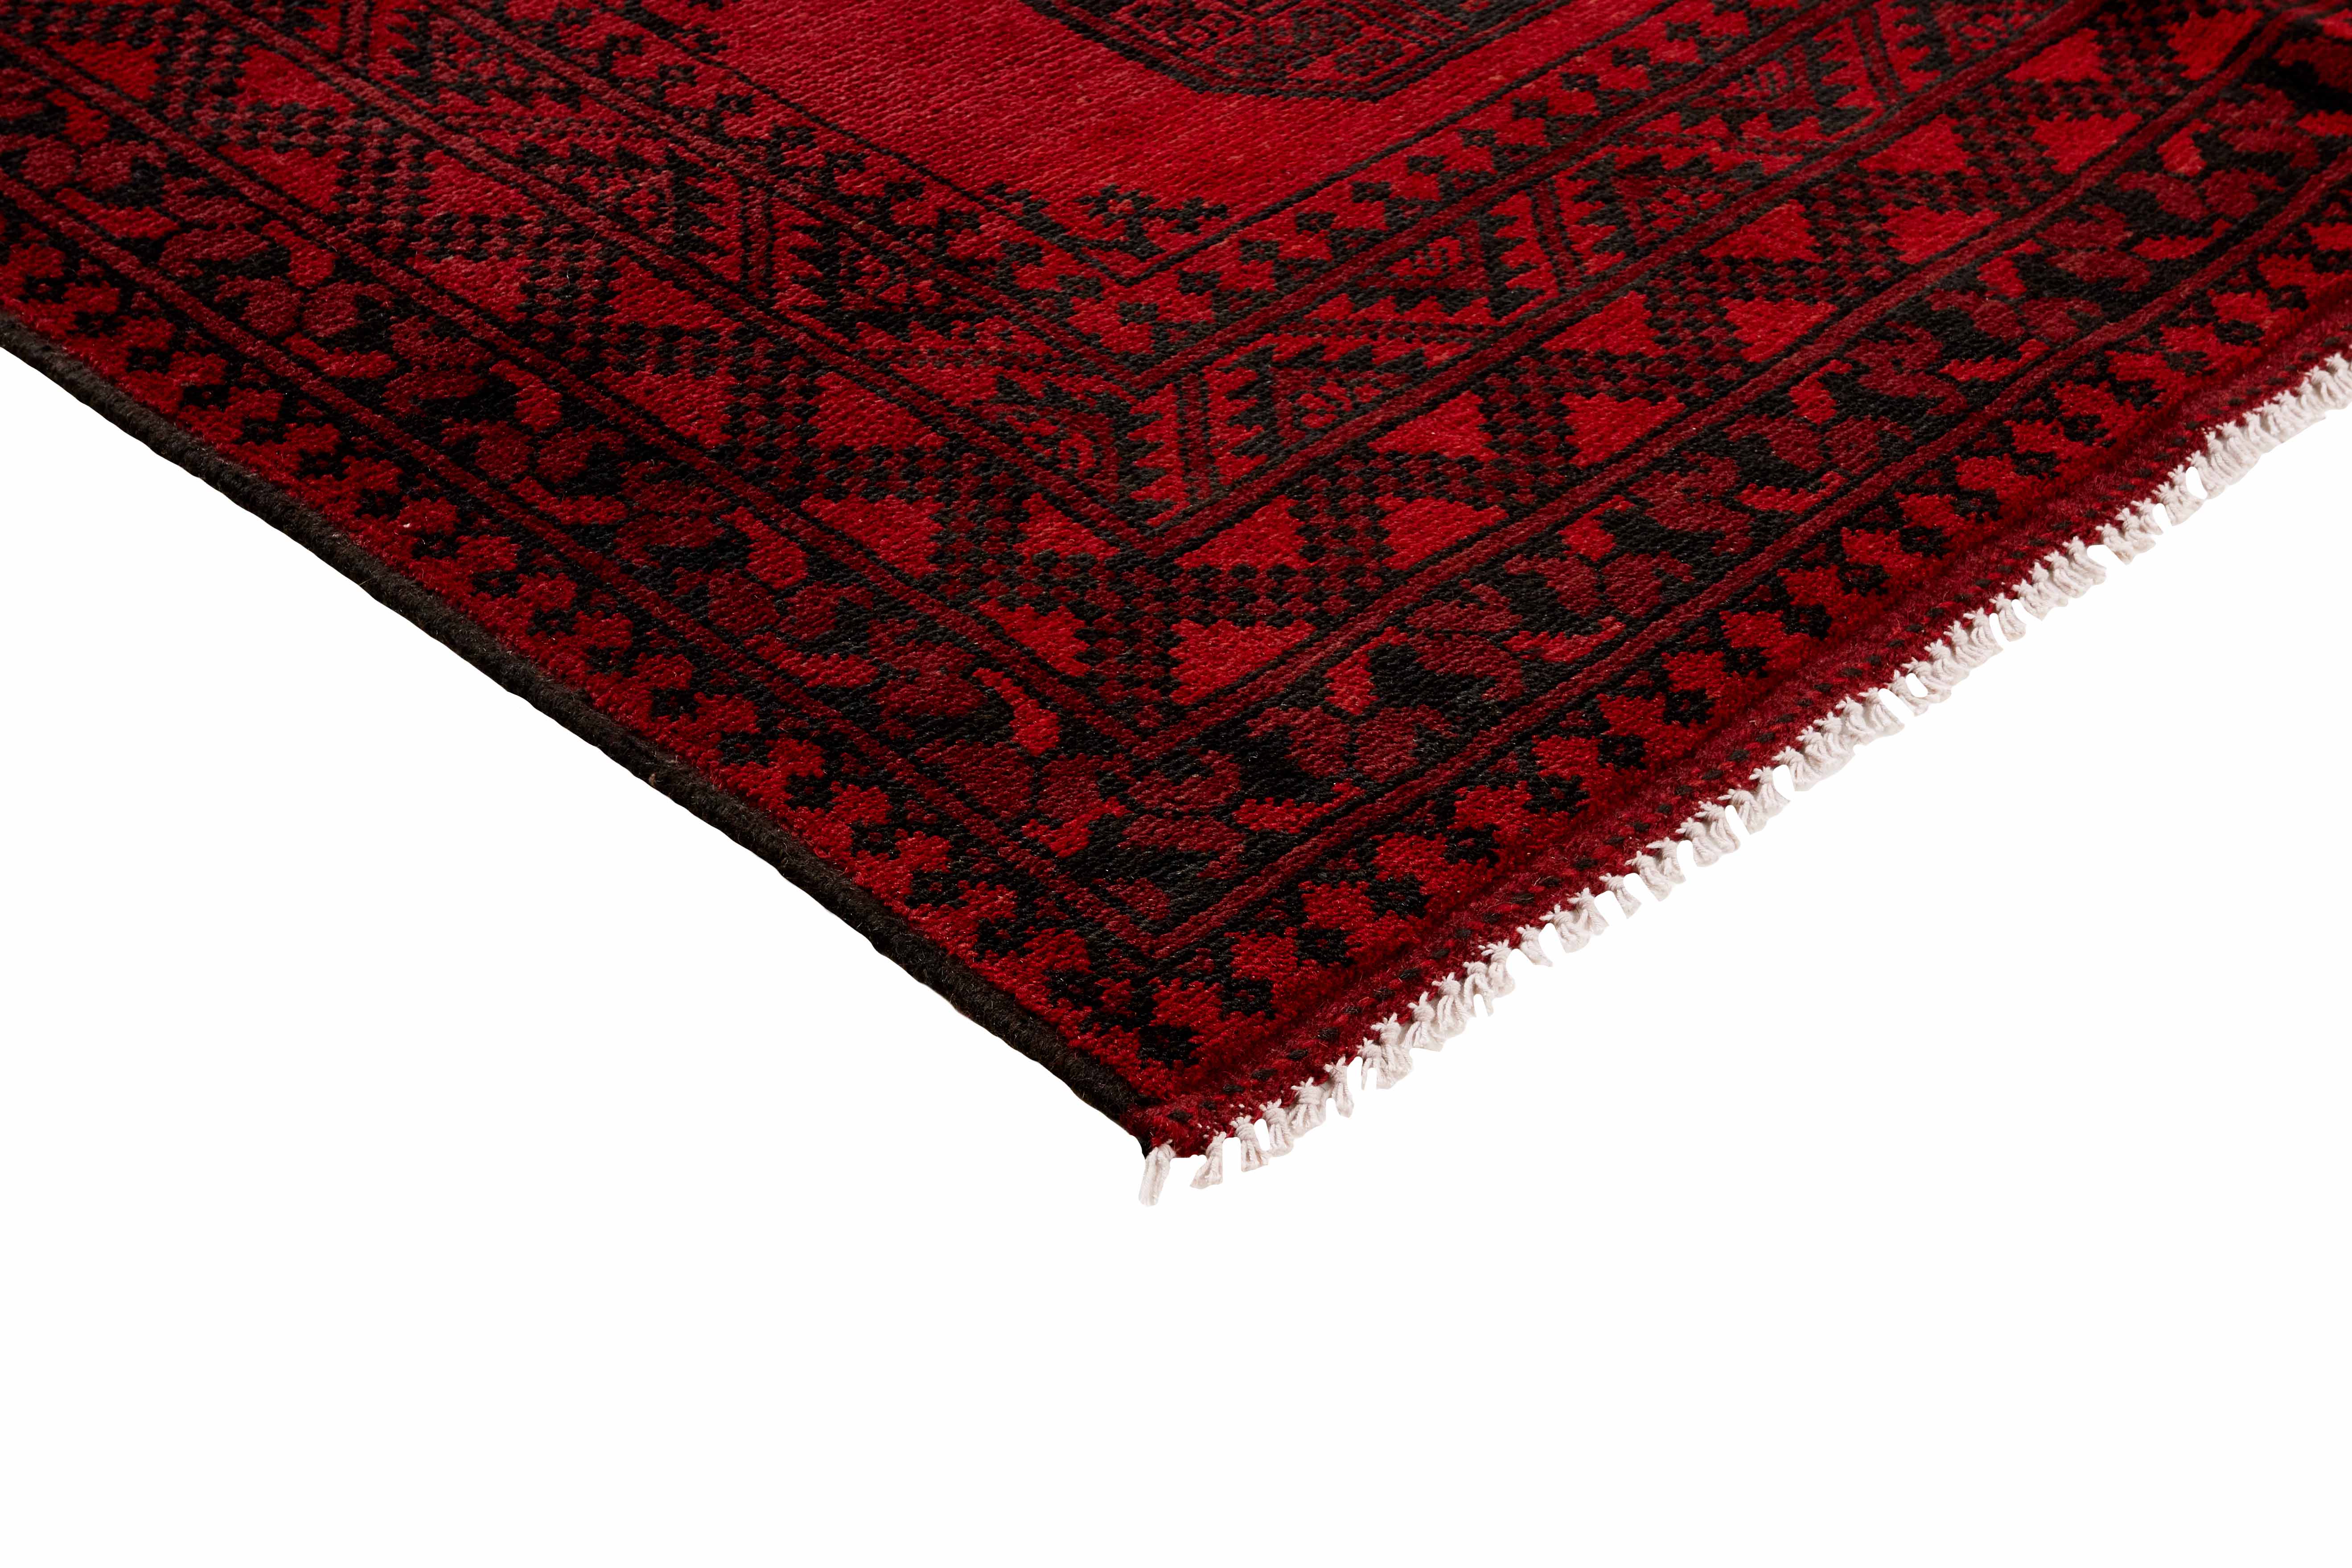 Red oriental rug with traditional elephant's foot pattern